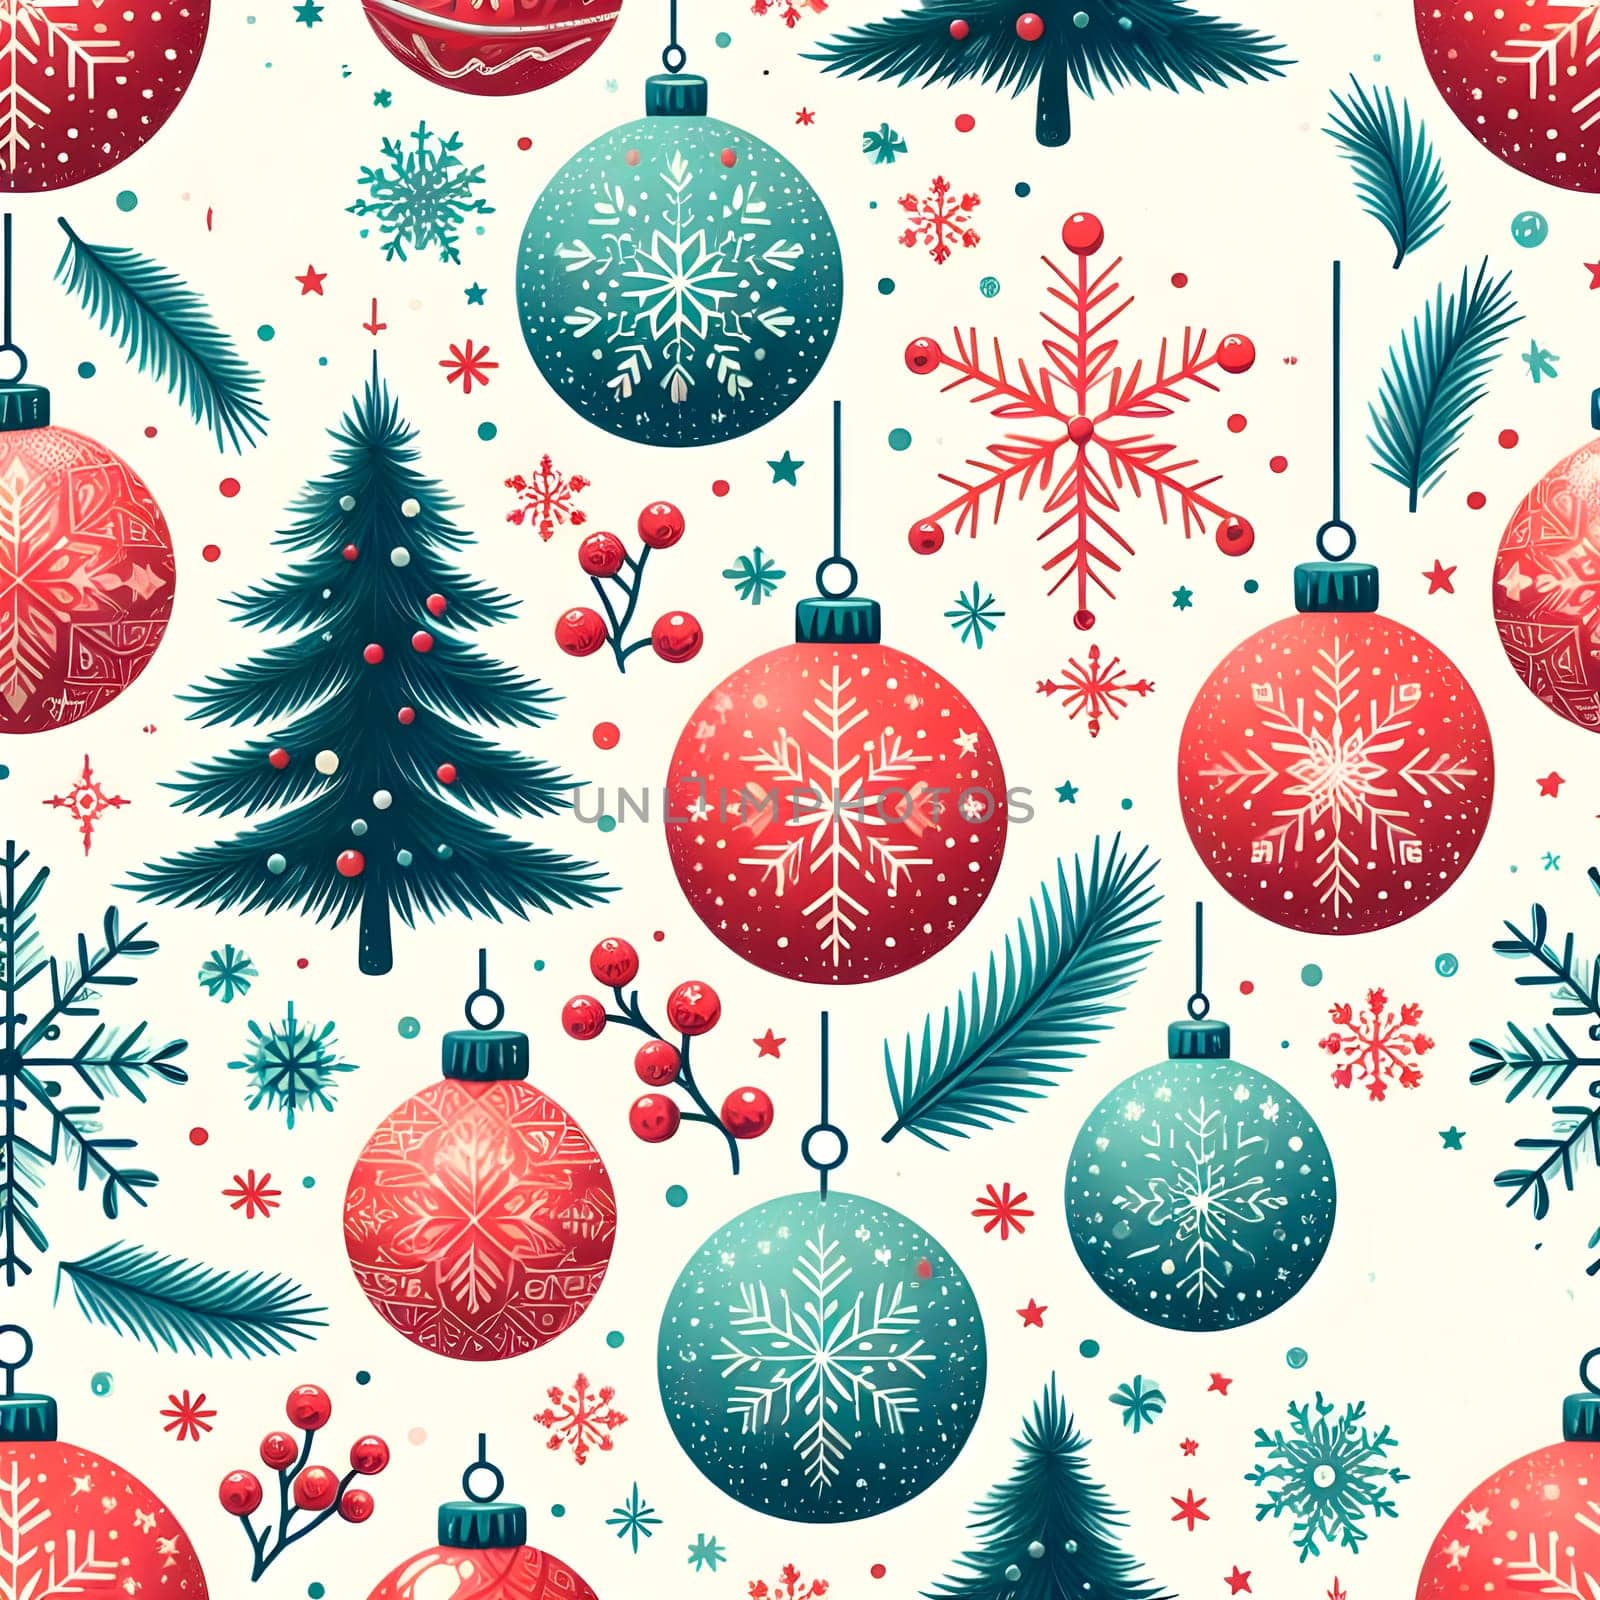 New year pattern.Christmas decoration with balls,fir tree and snowfalls on white background.